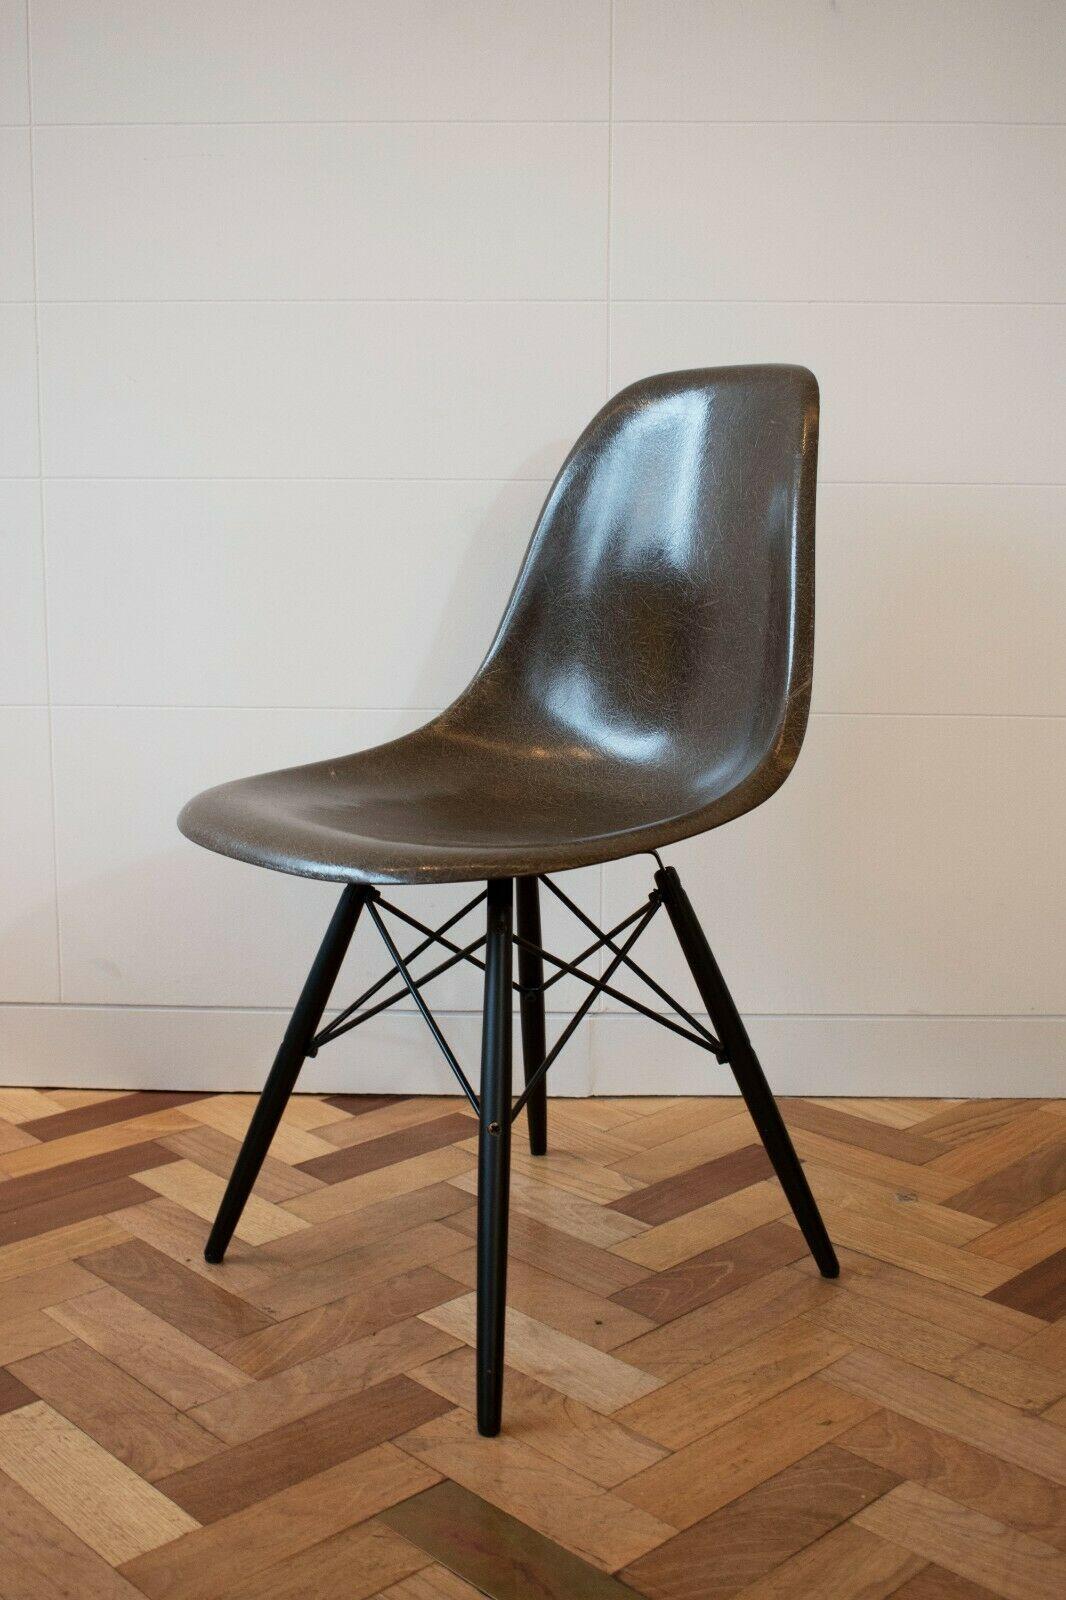 Set of 8 1960s Fibreglass Chairs by Charles and Ray Eames for Herman Miller 1